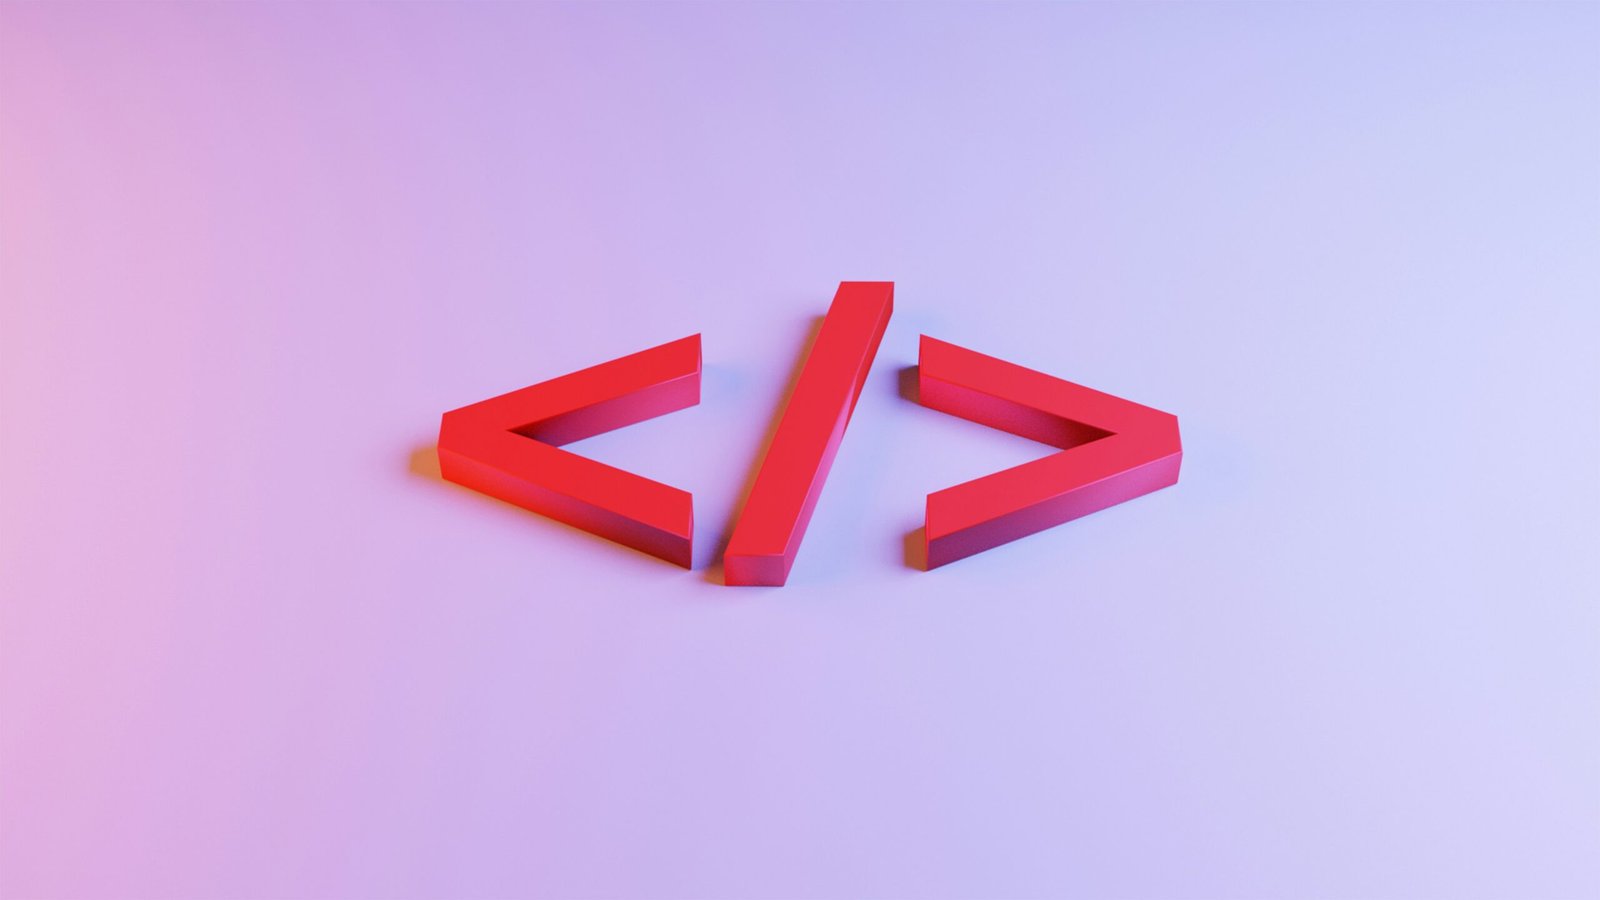 Red and purple Coding symbol on red and purple background.